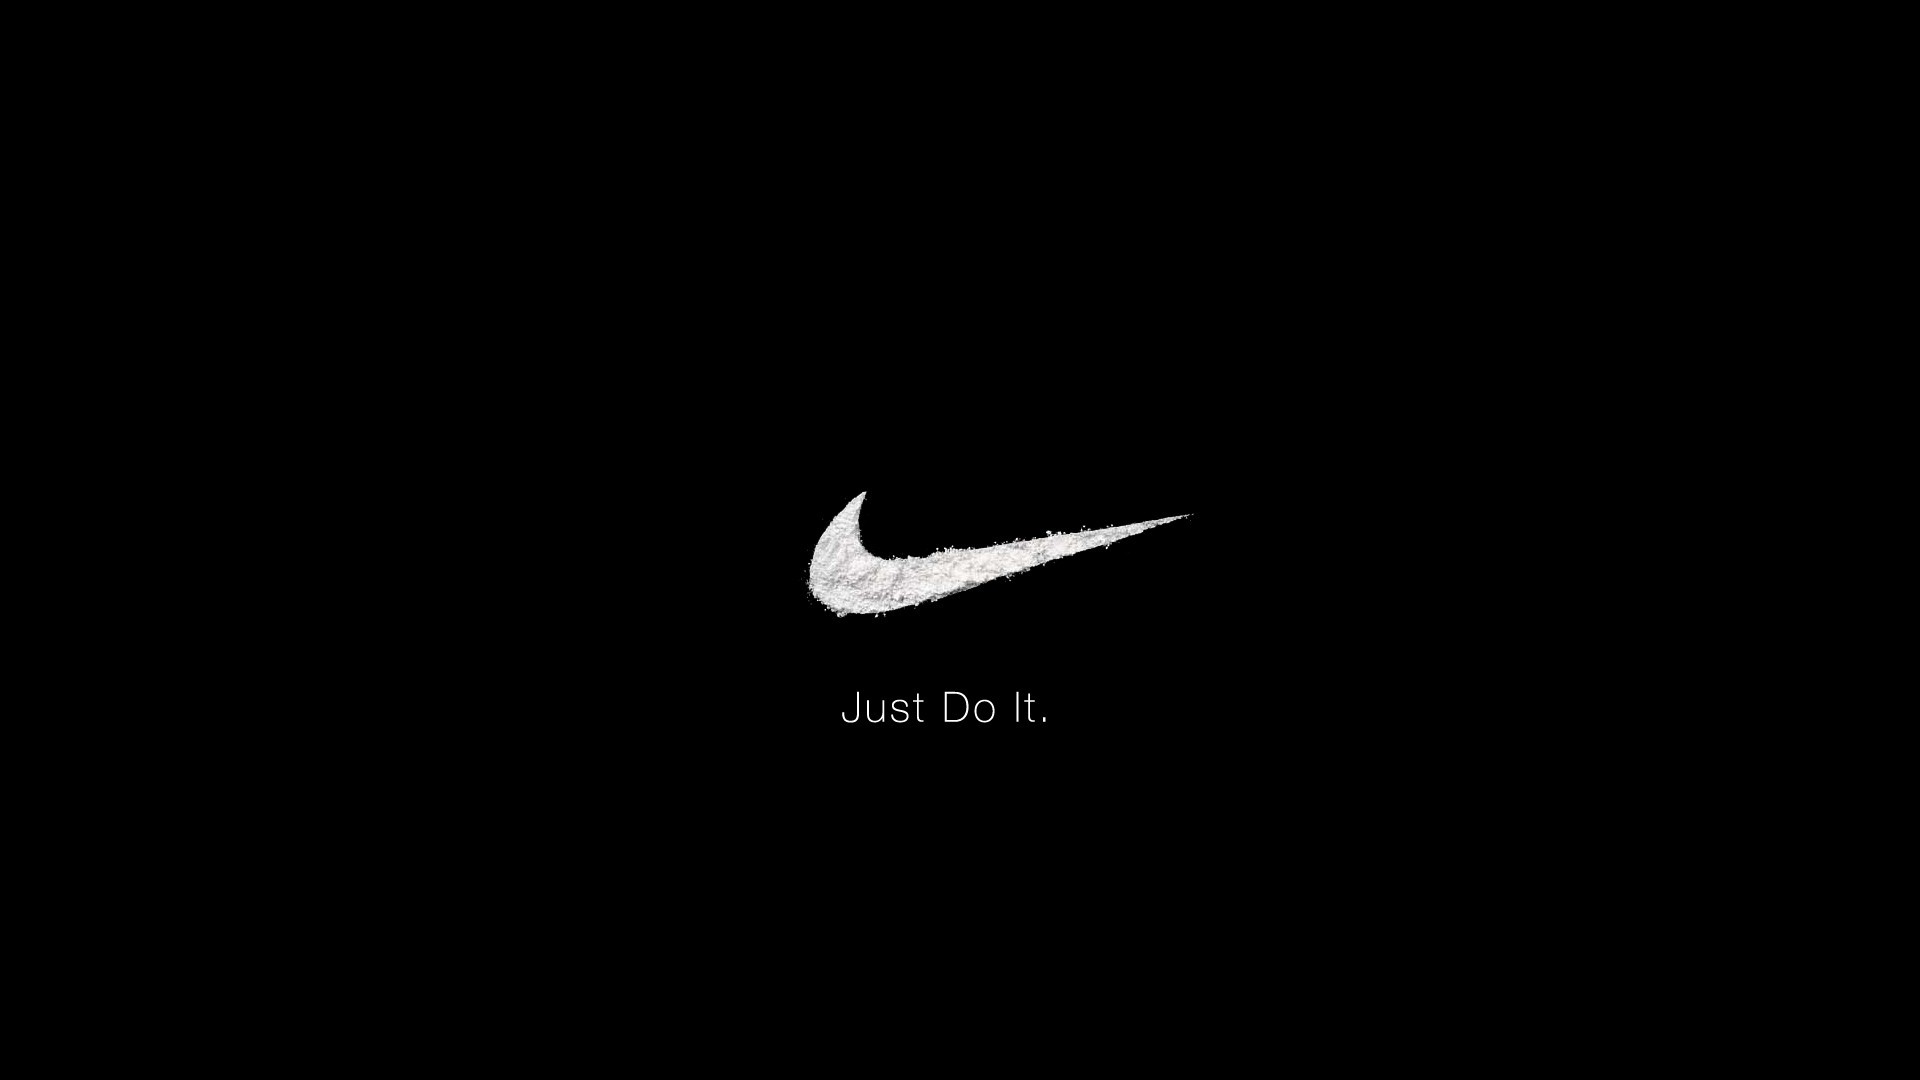 Just Do It. “Just do it.” The Nike slogan was…